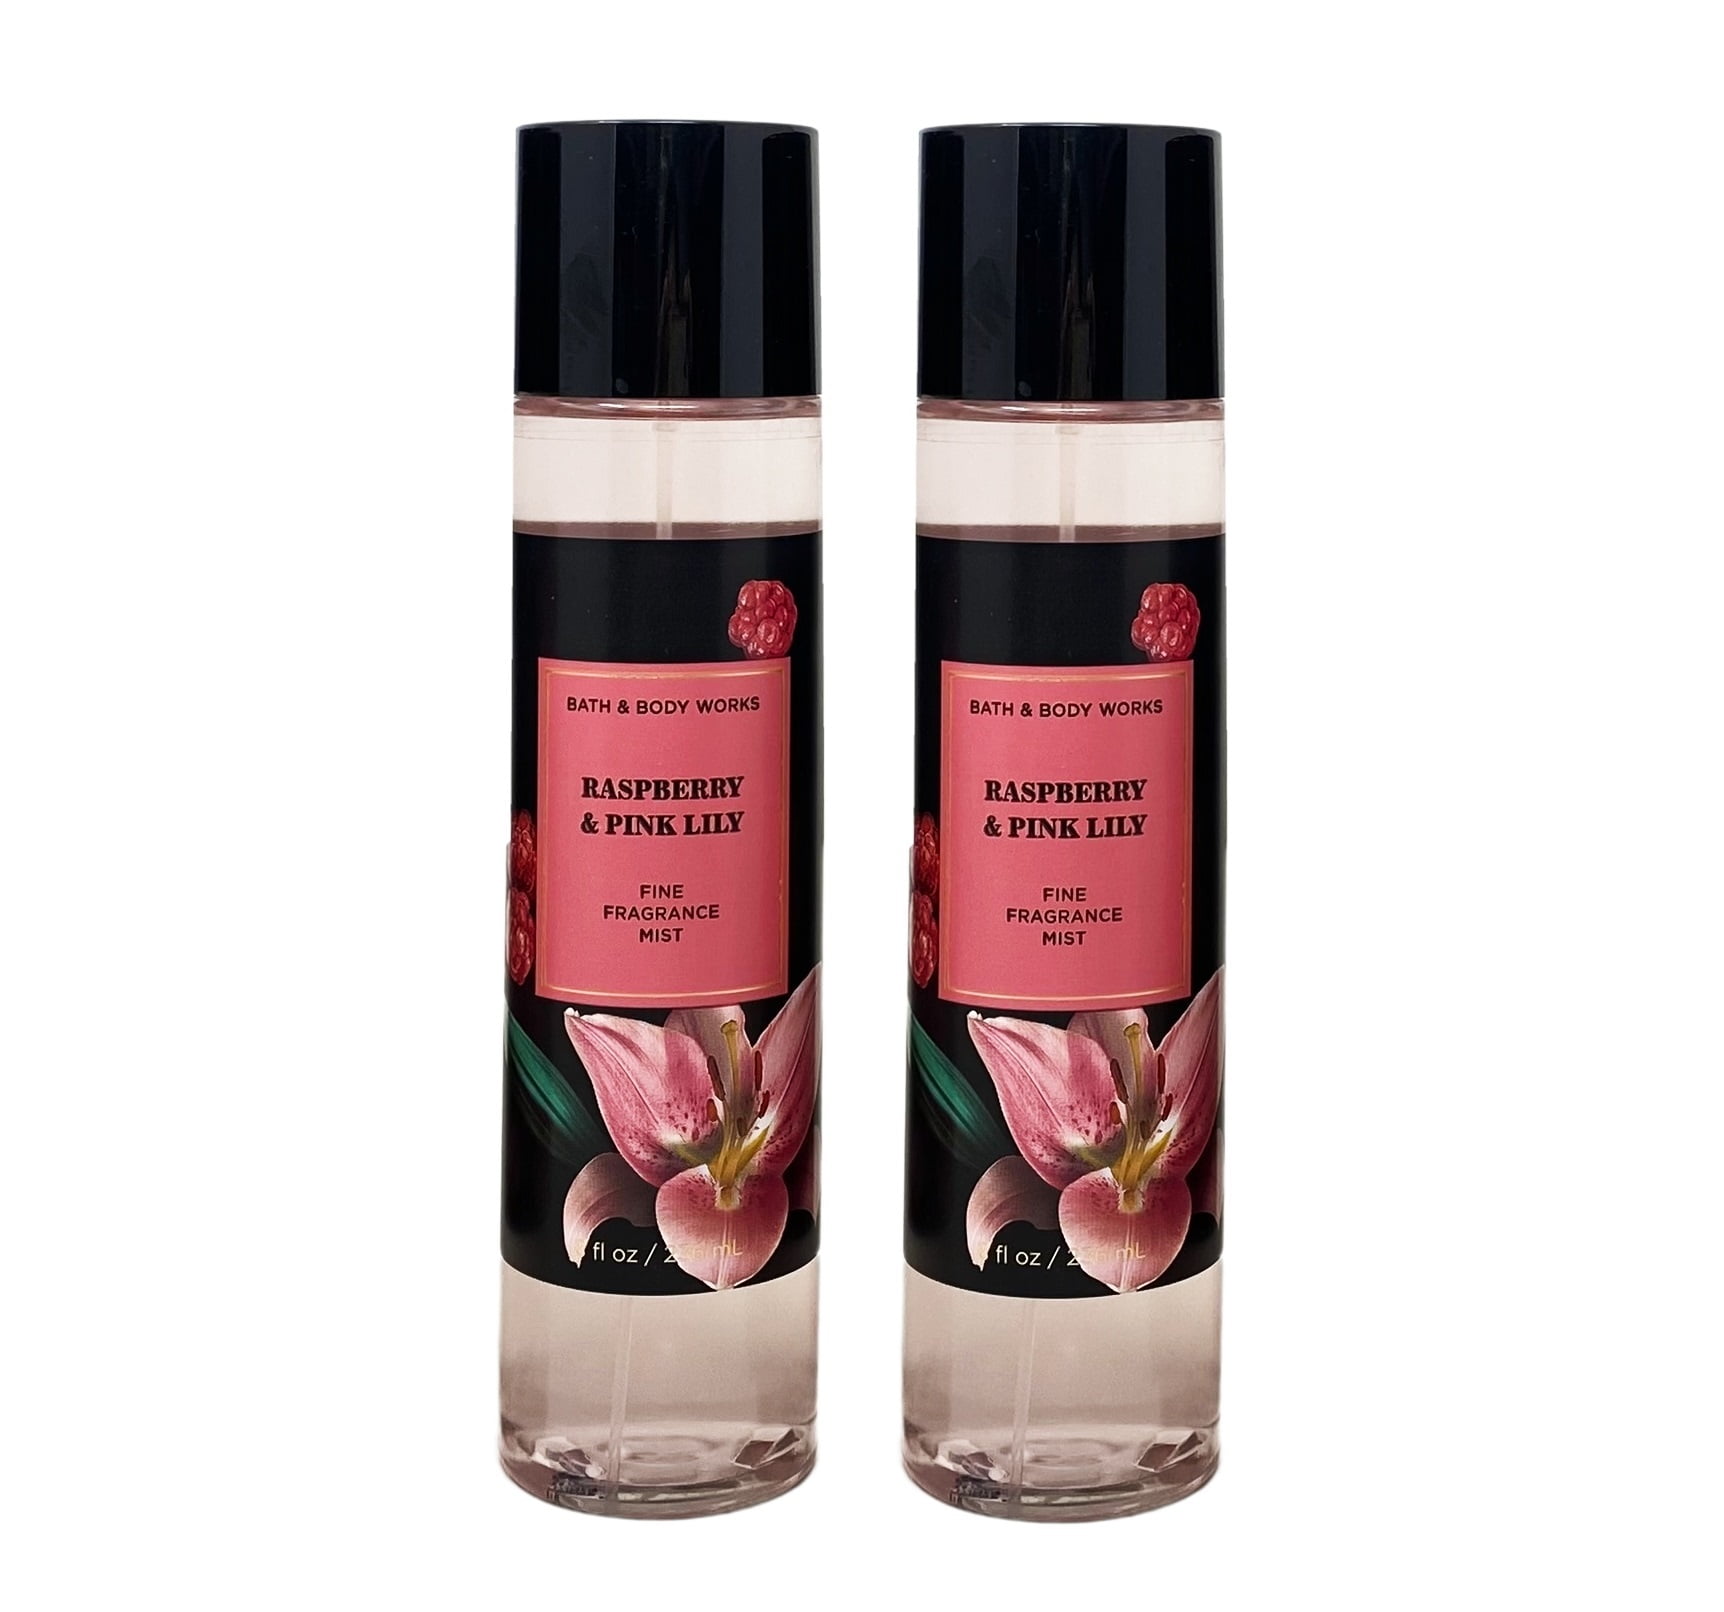 Bath And Body Works Raspberry And Pink Lily 2 Piece Fine Fragrance Mist Value Pack 8 Fl Oz 236